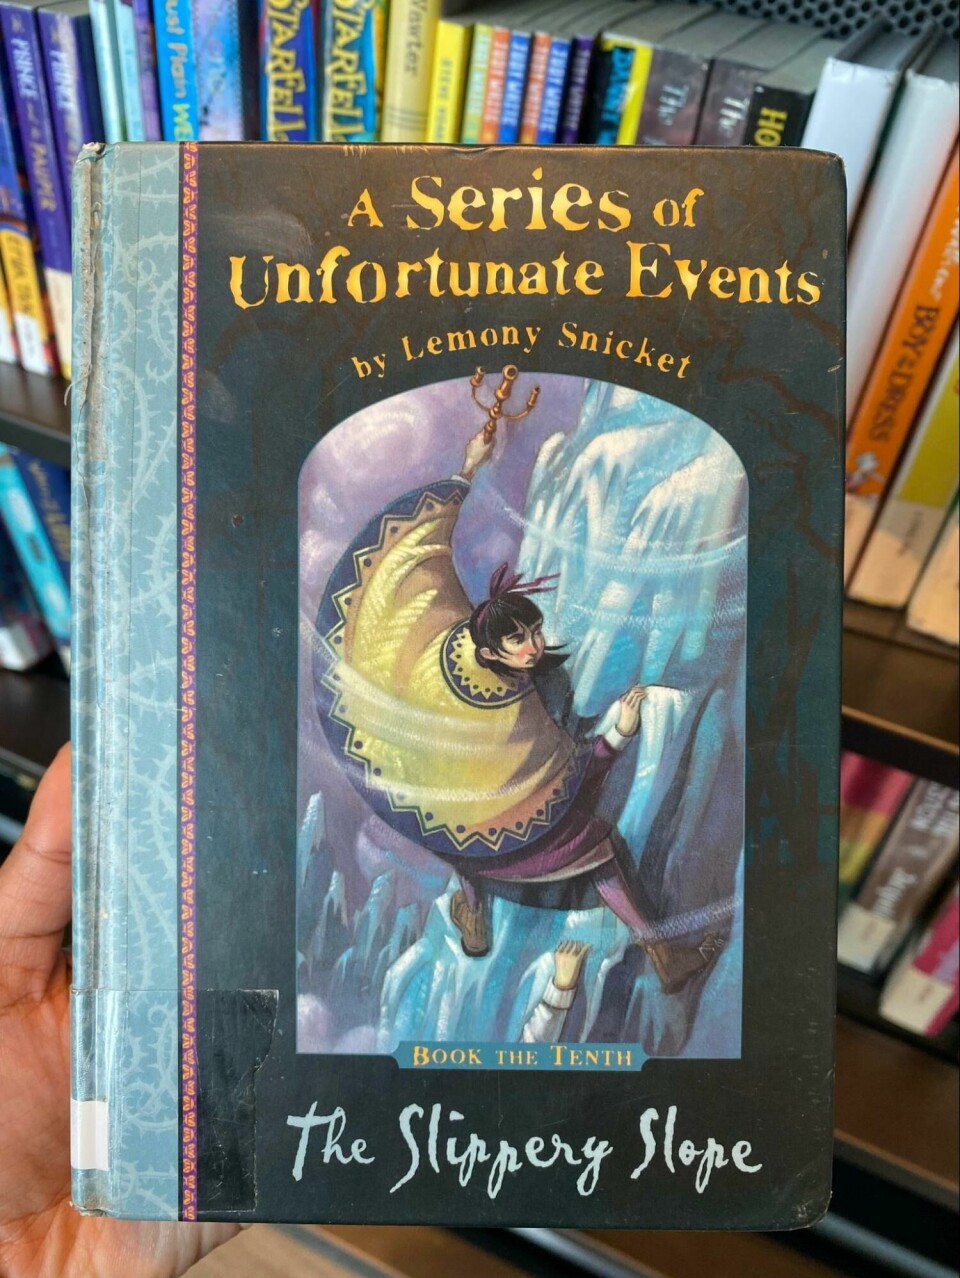 A Series of Unfortunate Events by Lemony Snicket.